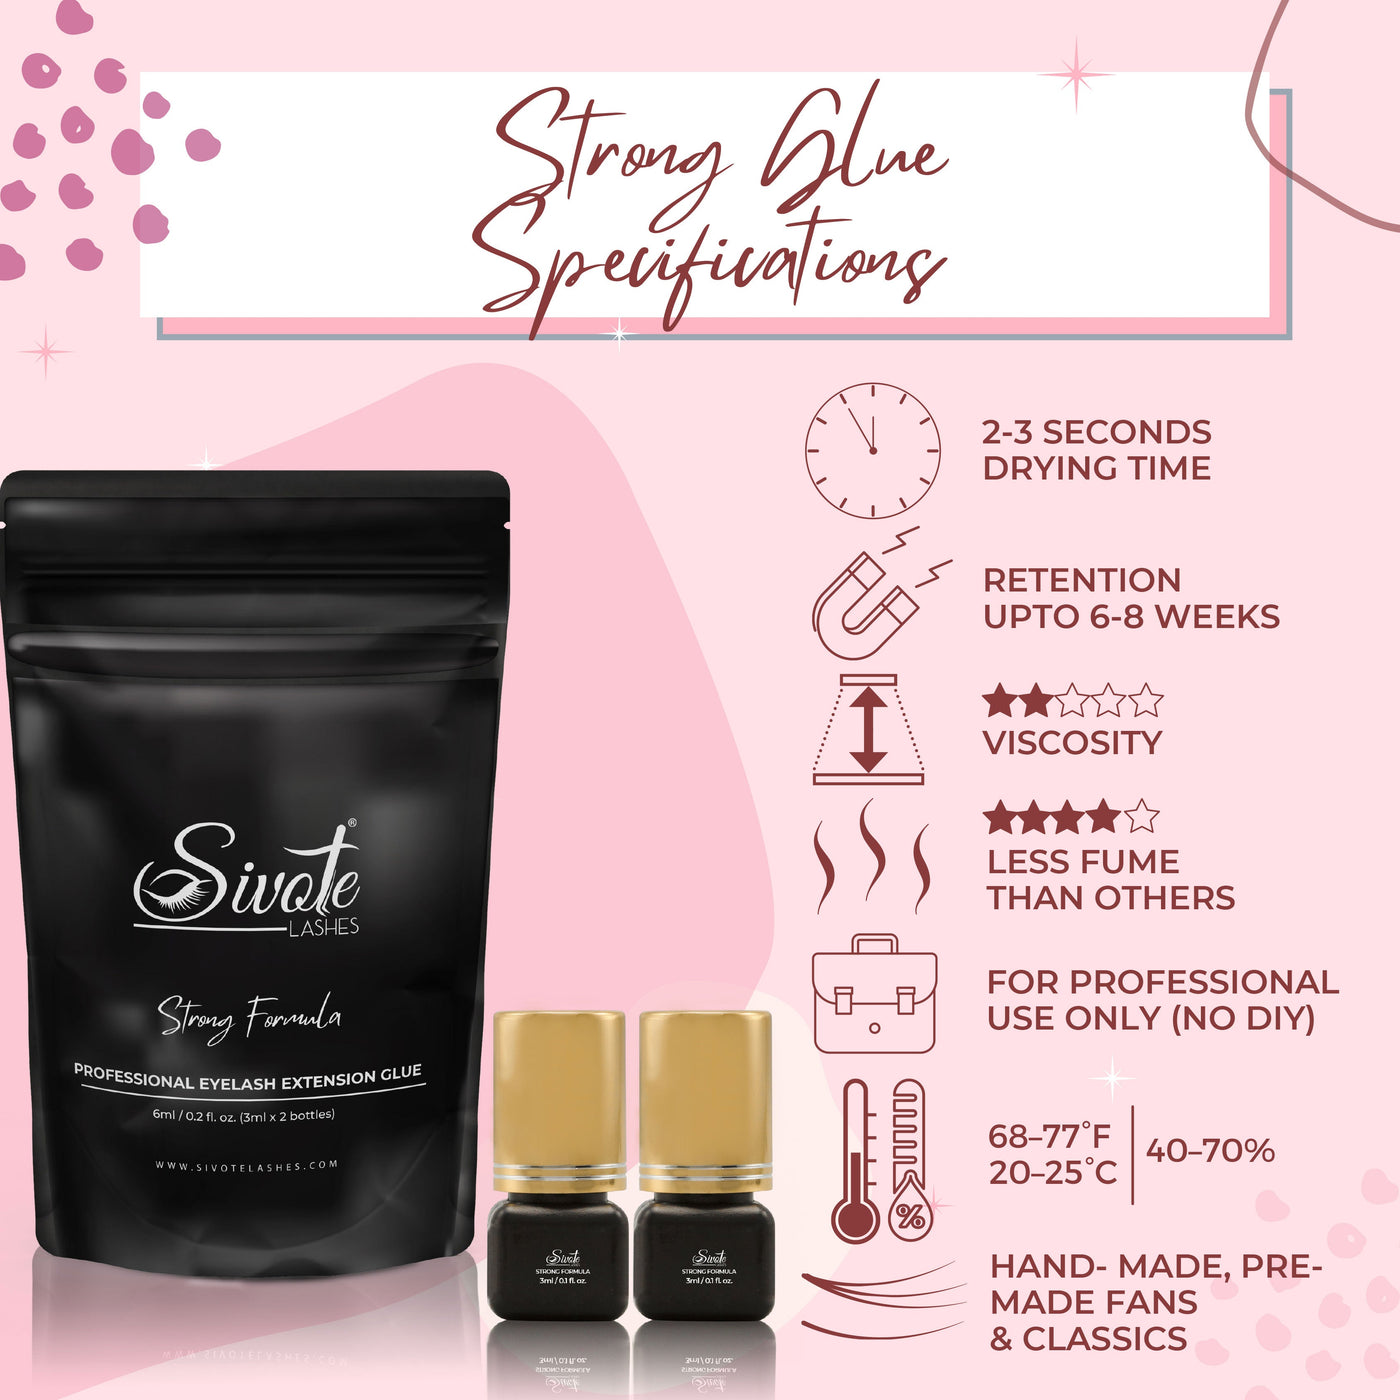 STRONG LASH EXTENSION GLUE - Sivote Lashes